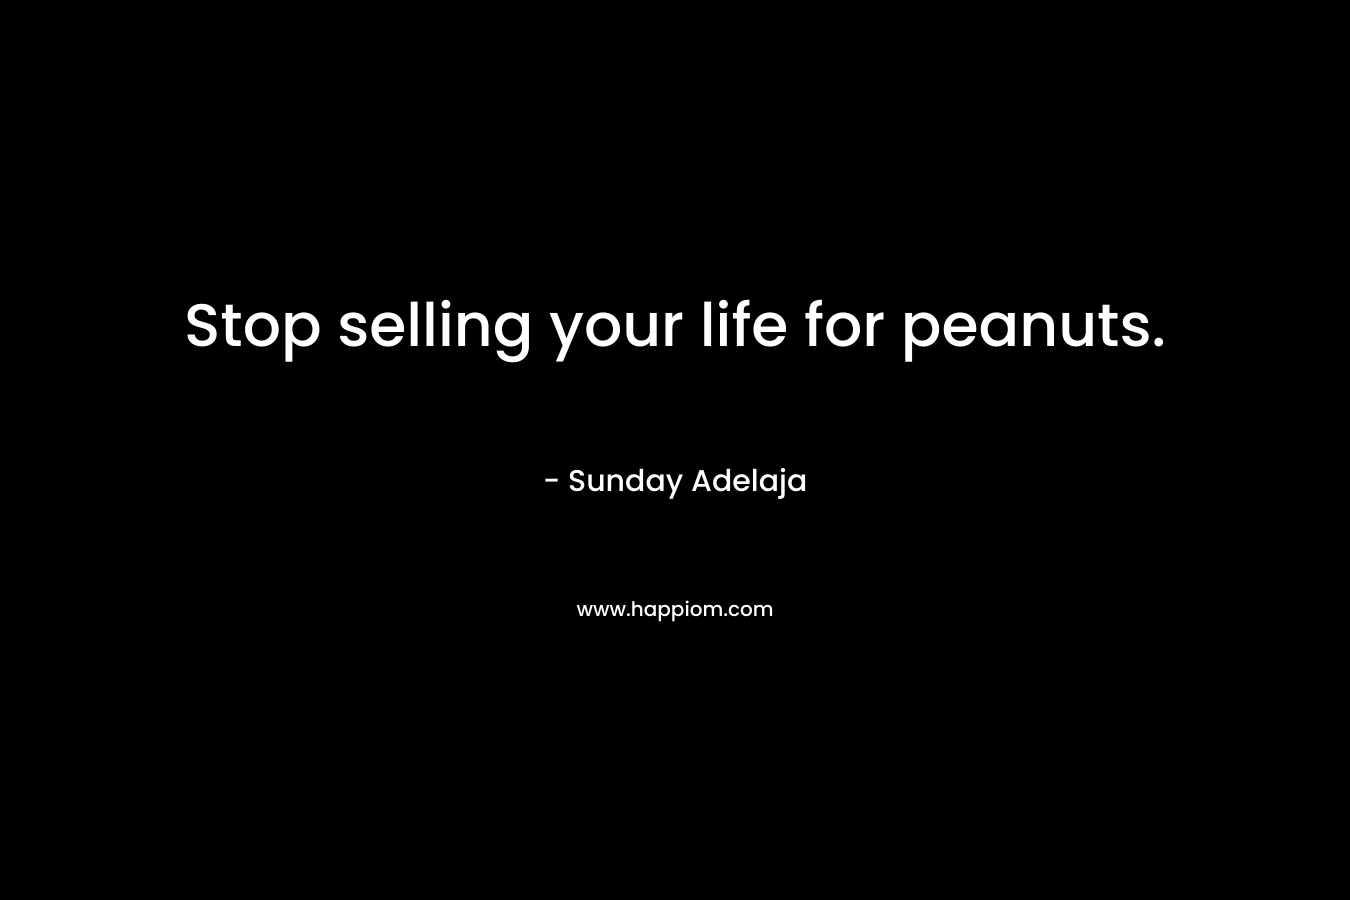 Stop selling your life for peanuts.